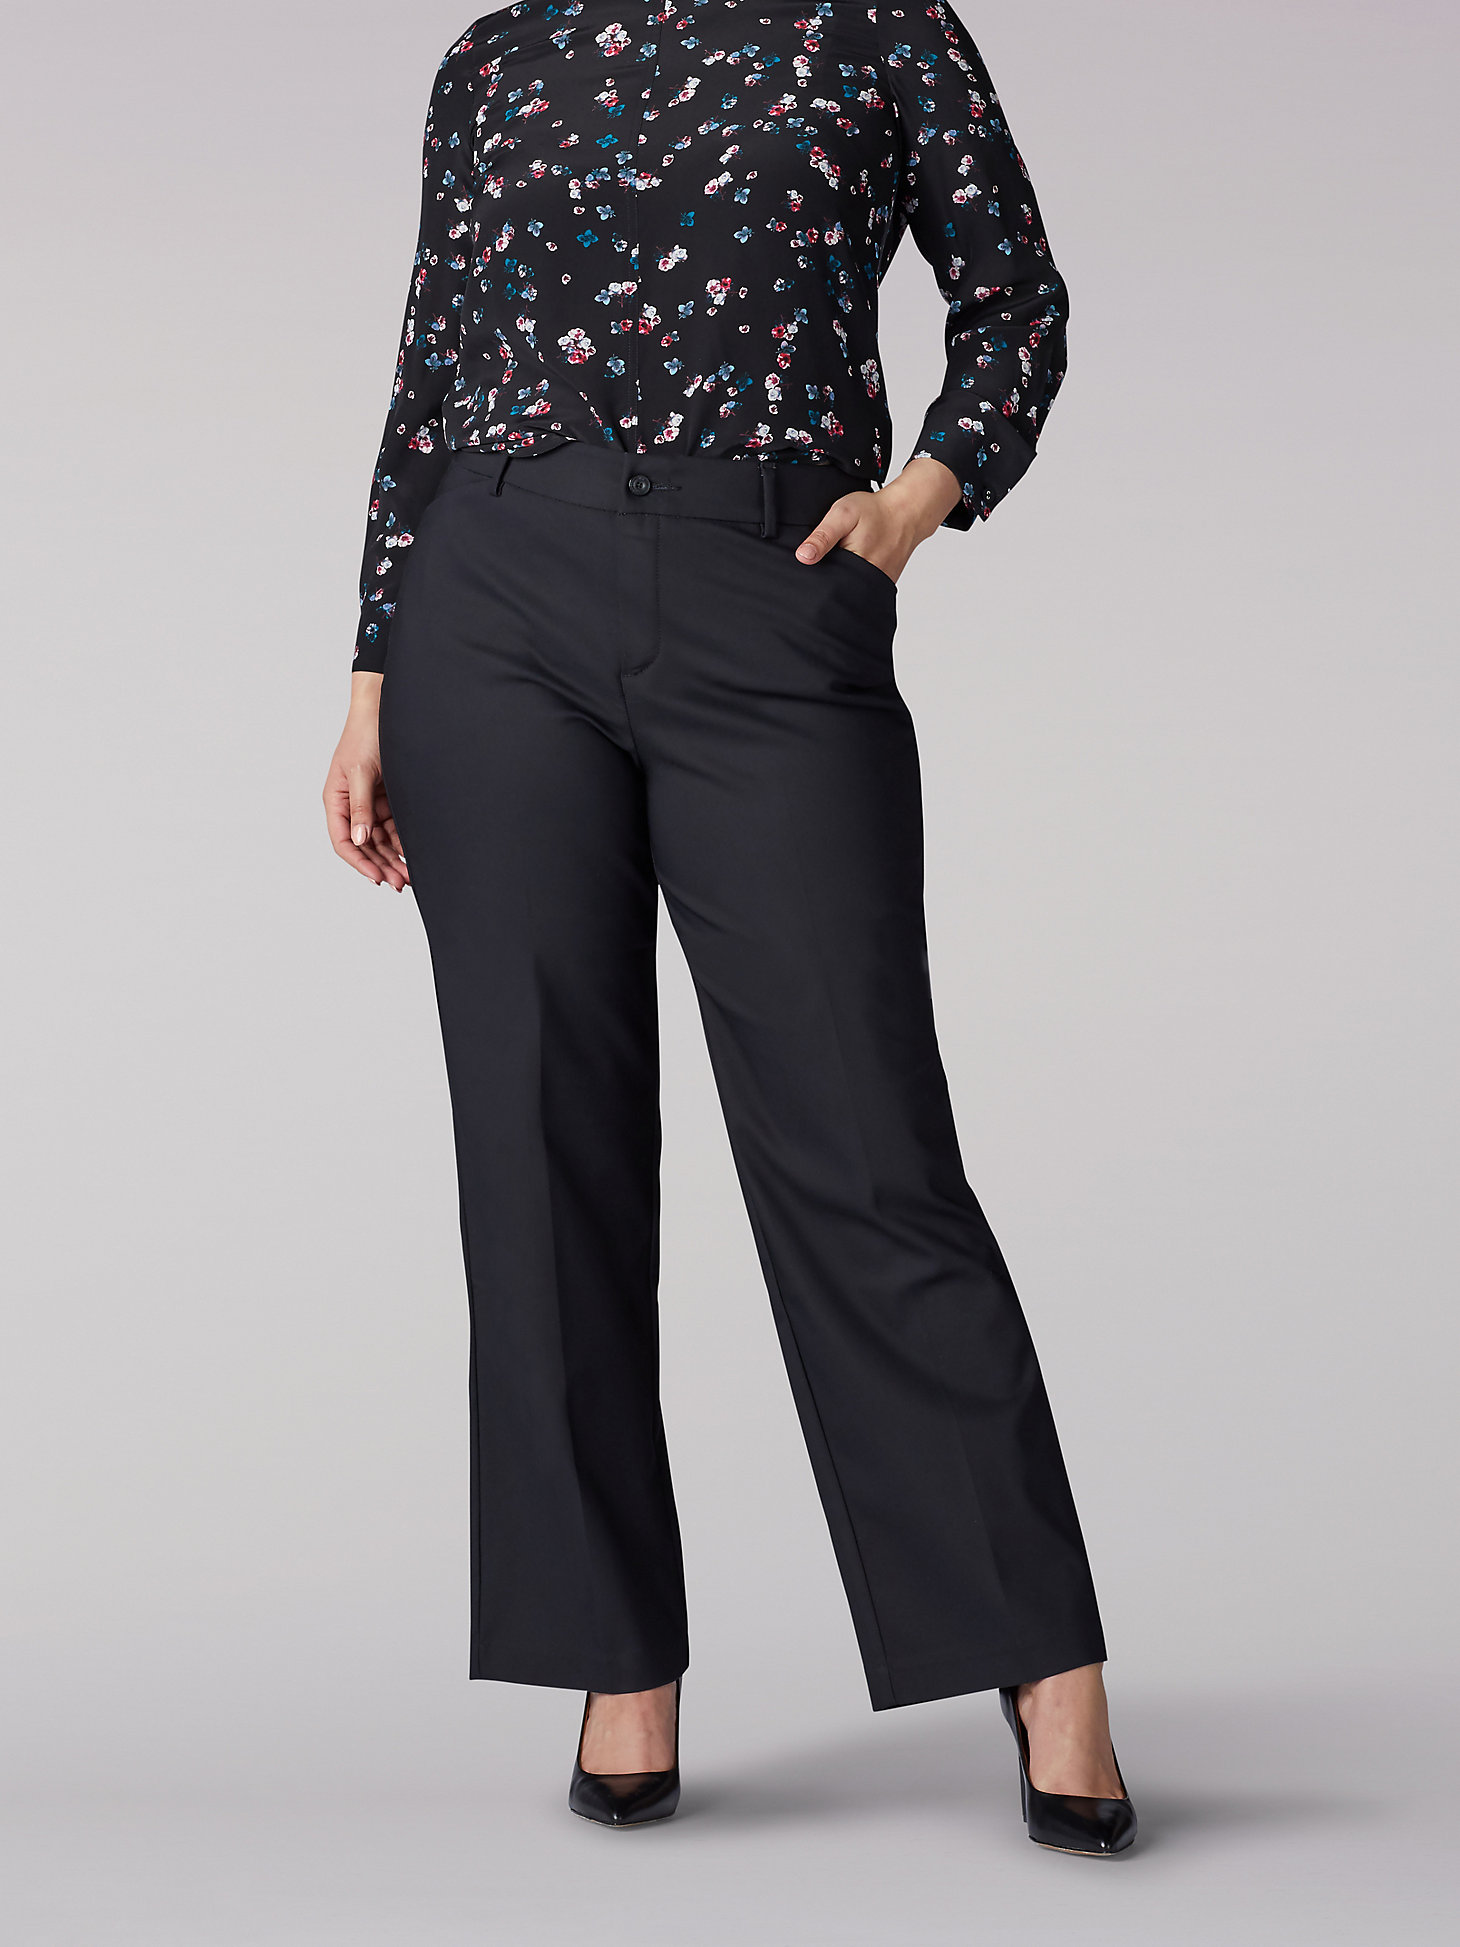 Women's Ultra Lux with Flex Motion Regular Fit Trouser Pant (Plus) in Black main view